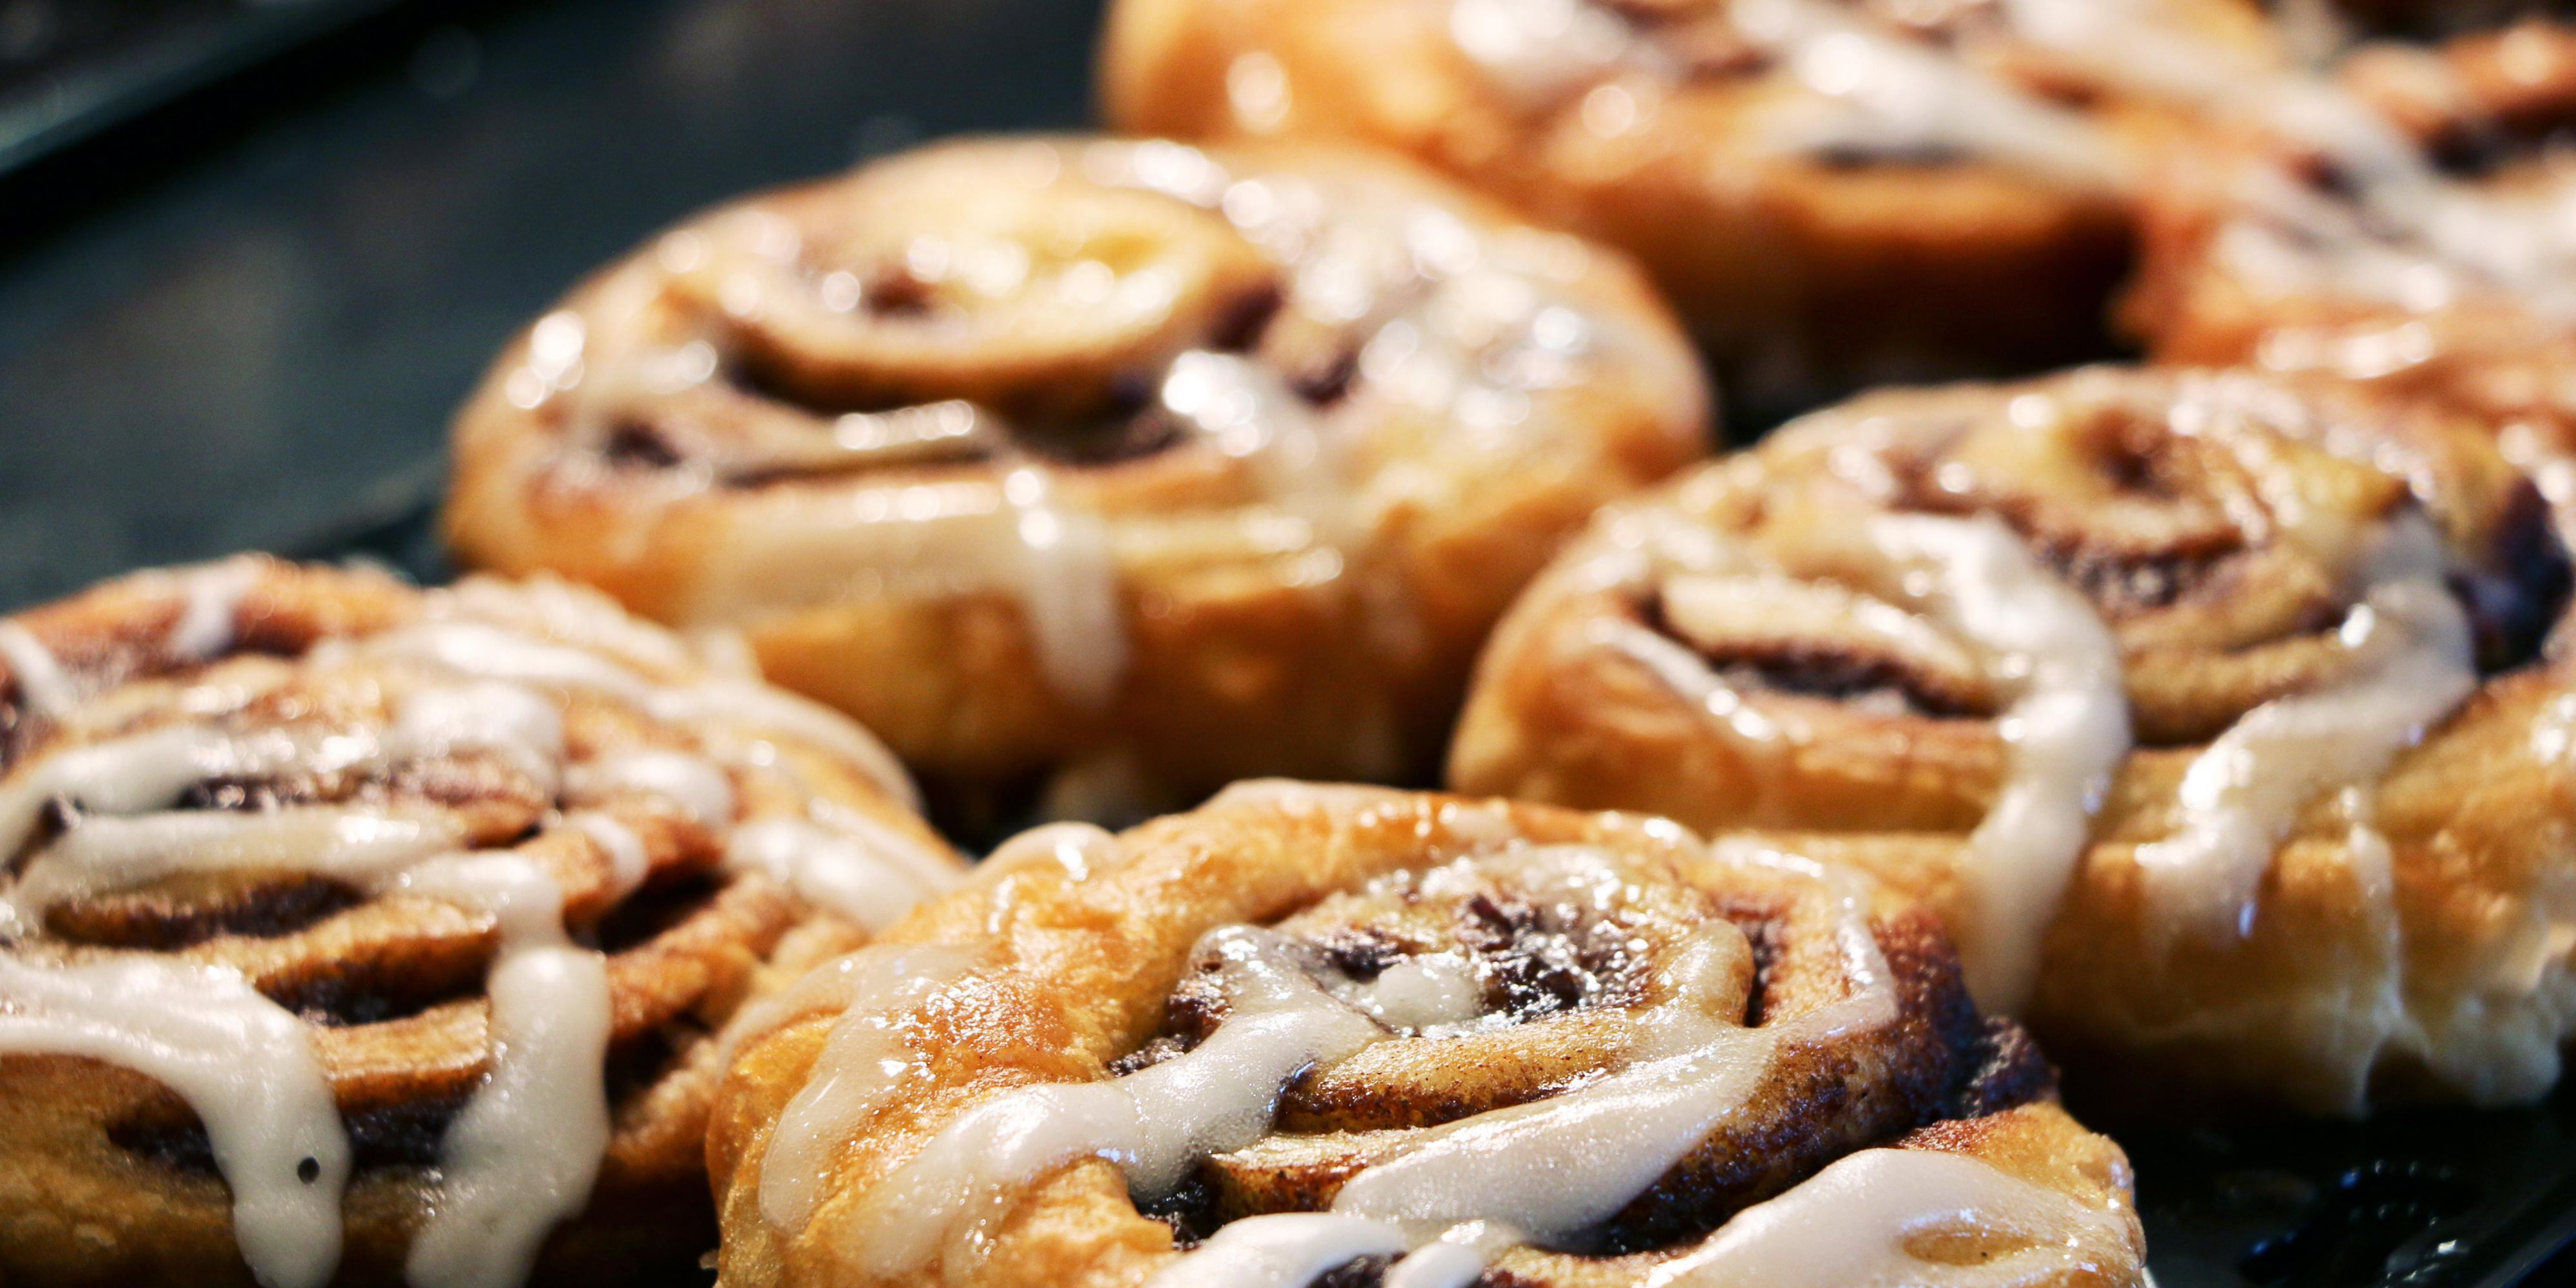 Start your day out right with a variety of breakfast options including our infamous cinnamon rolls and fresh, hot coffee.